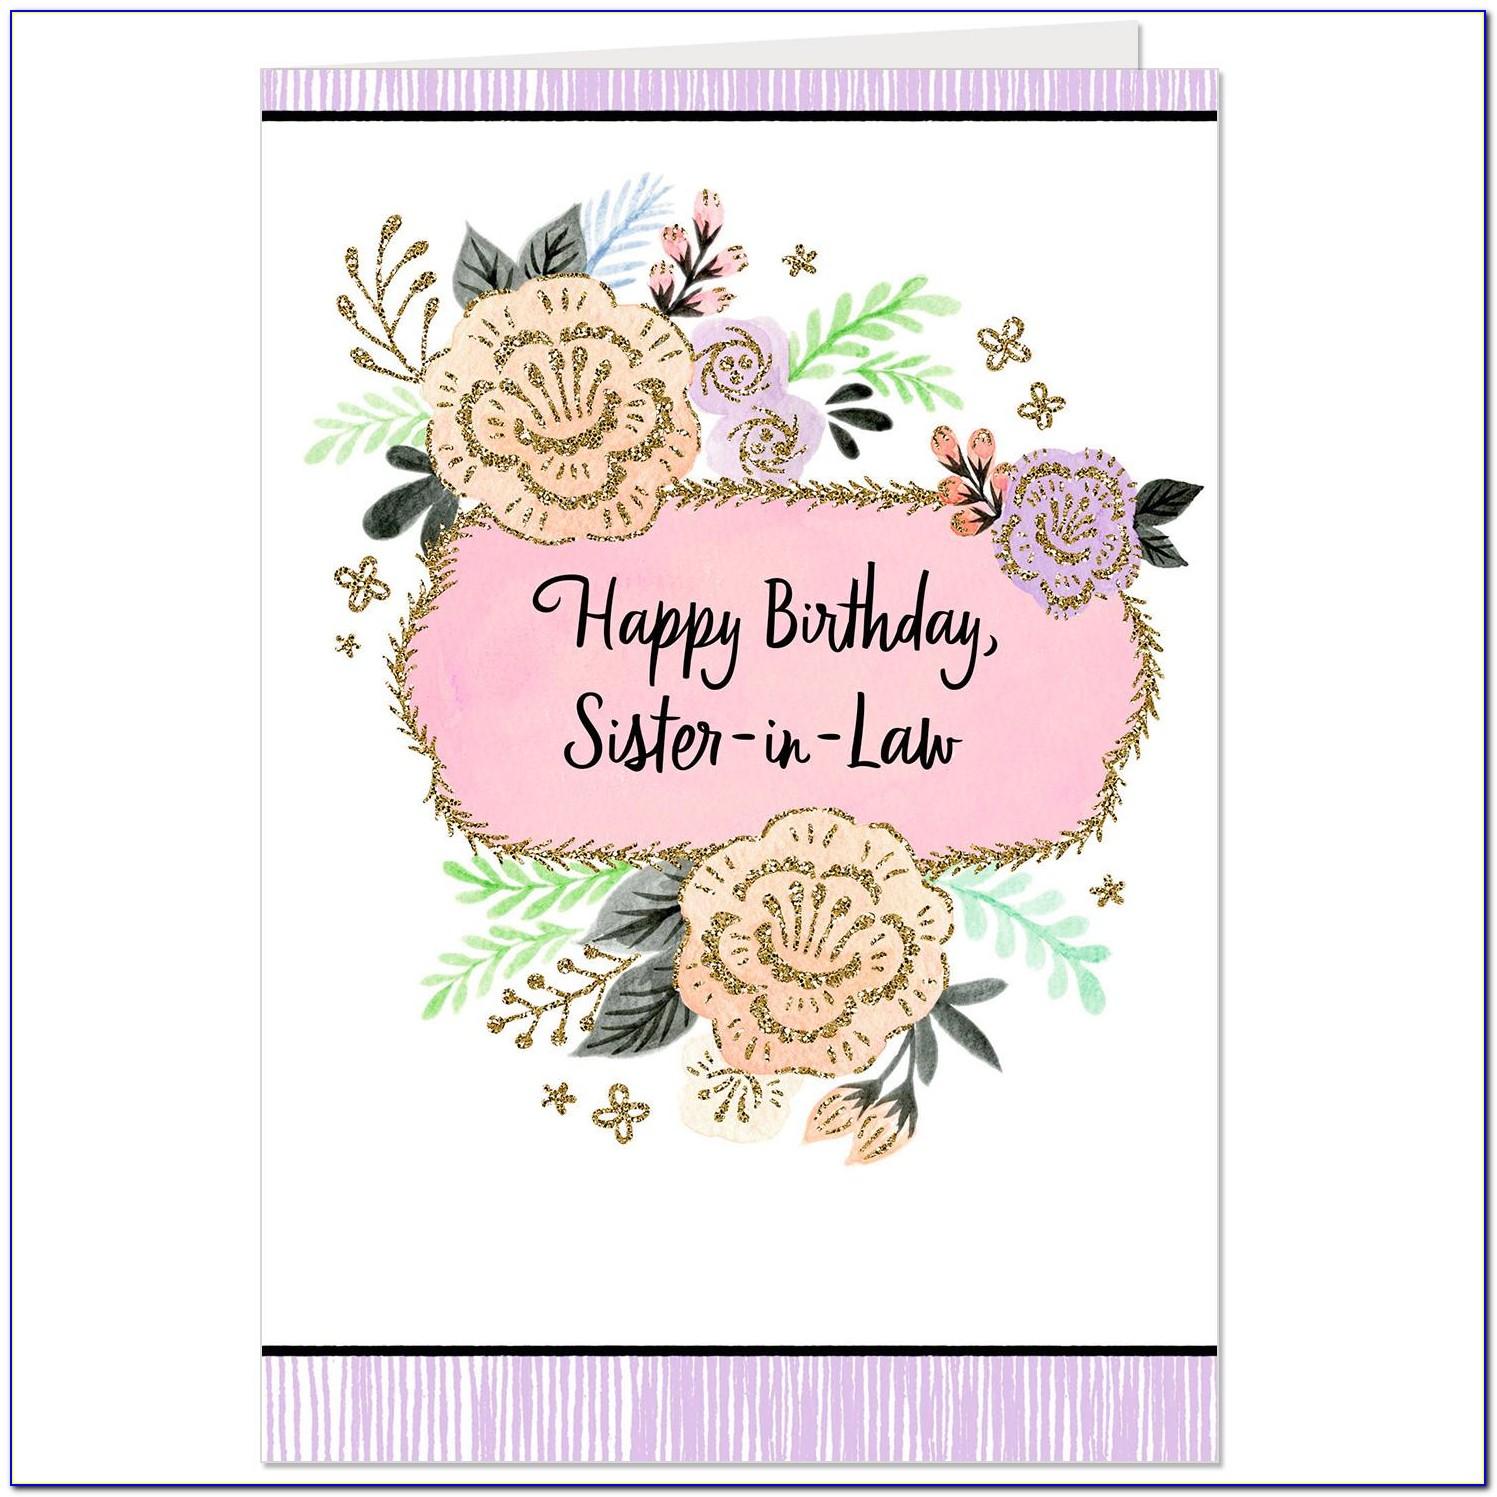 Free Birthday Cards For Sister On Facebook